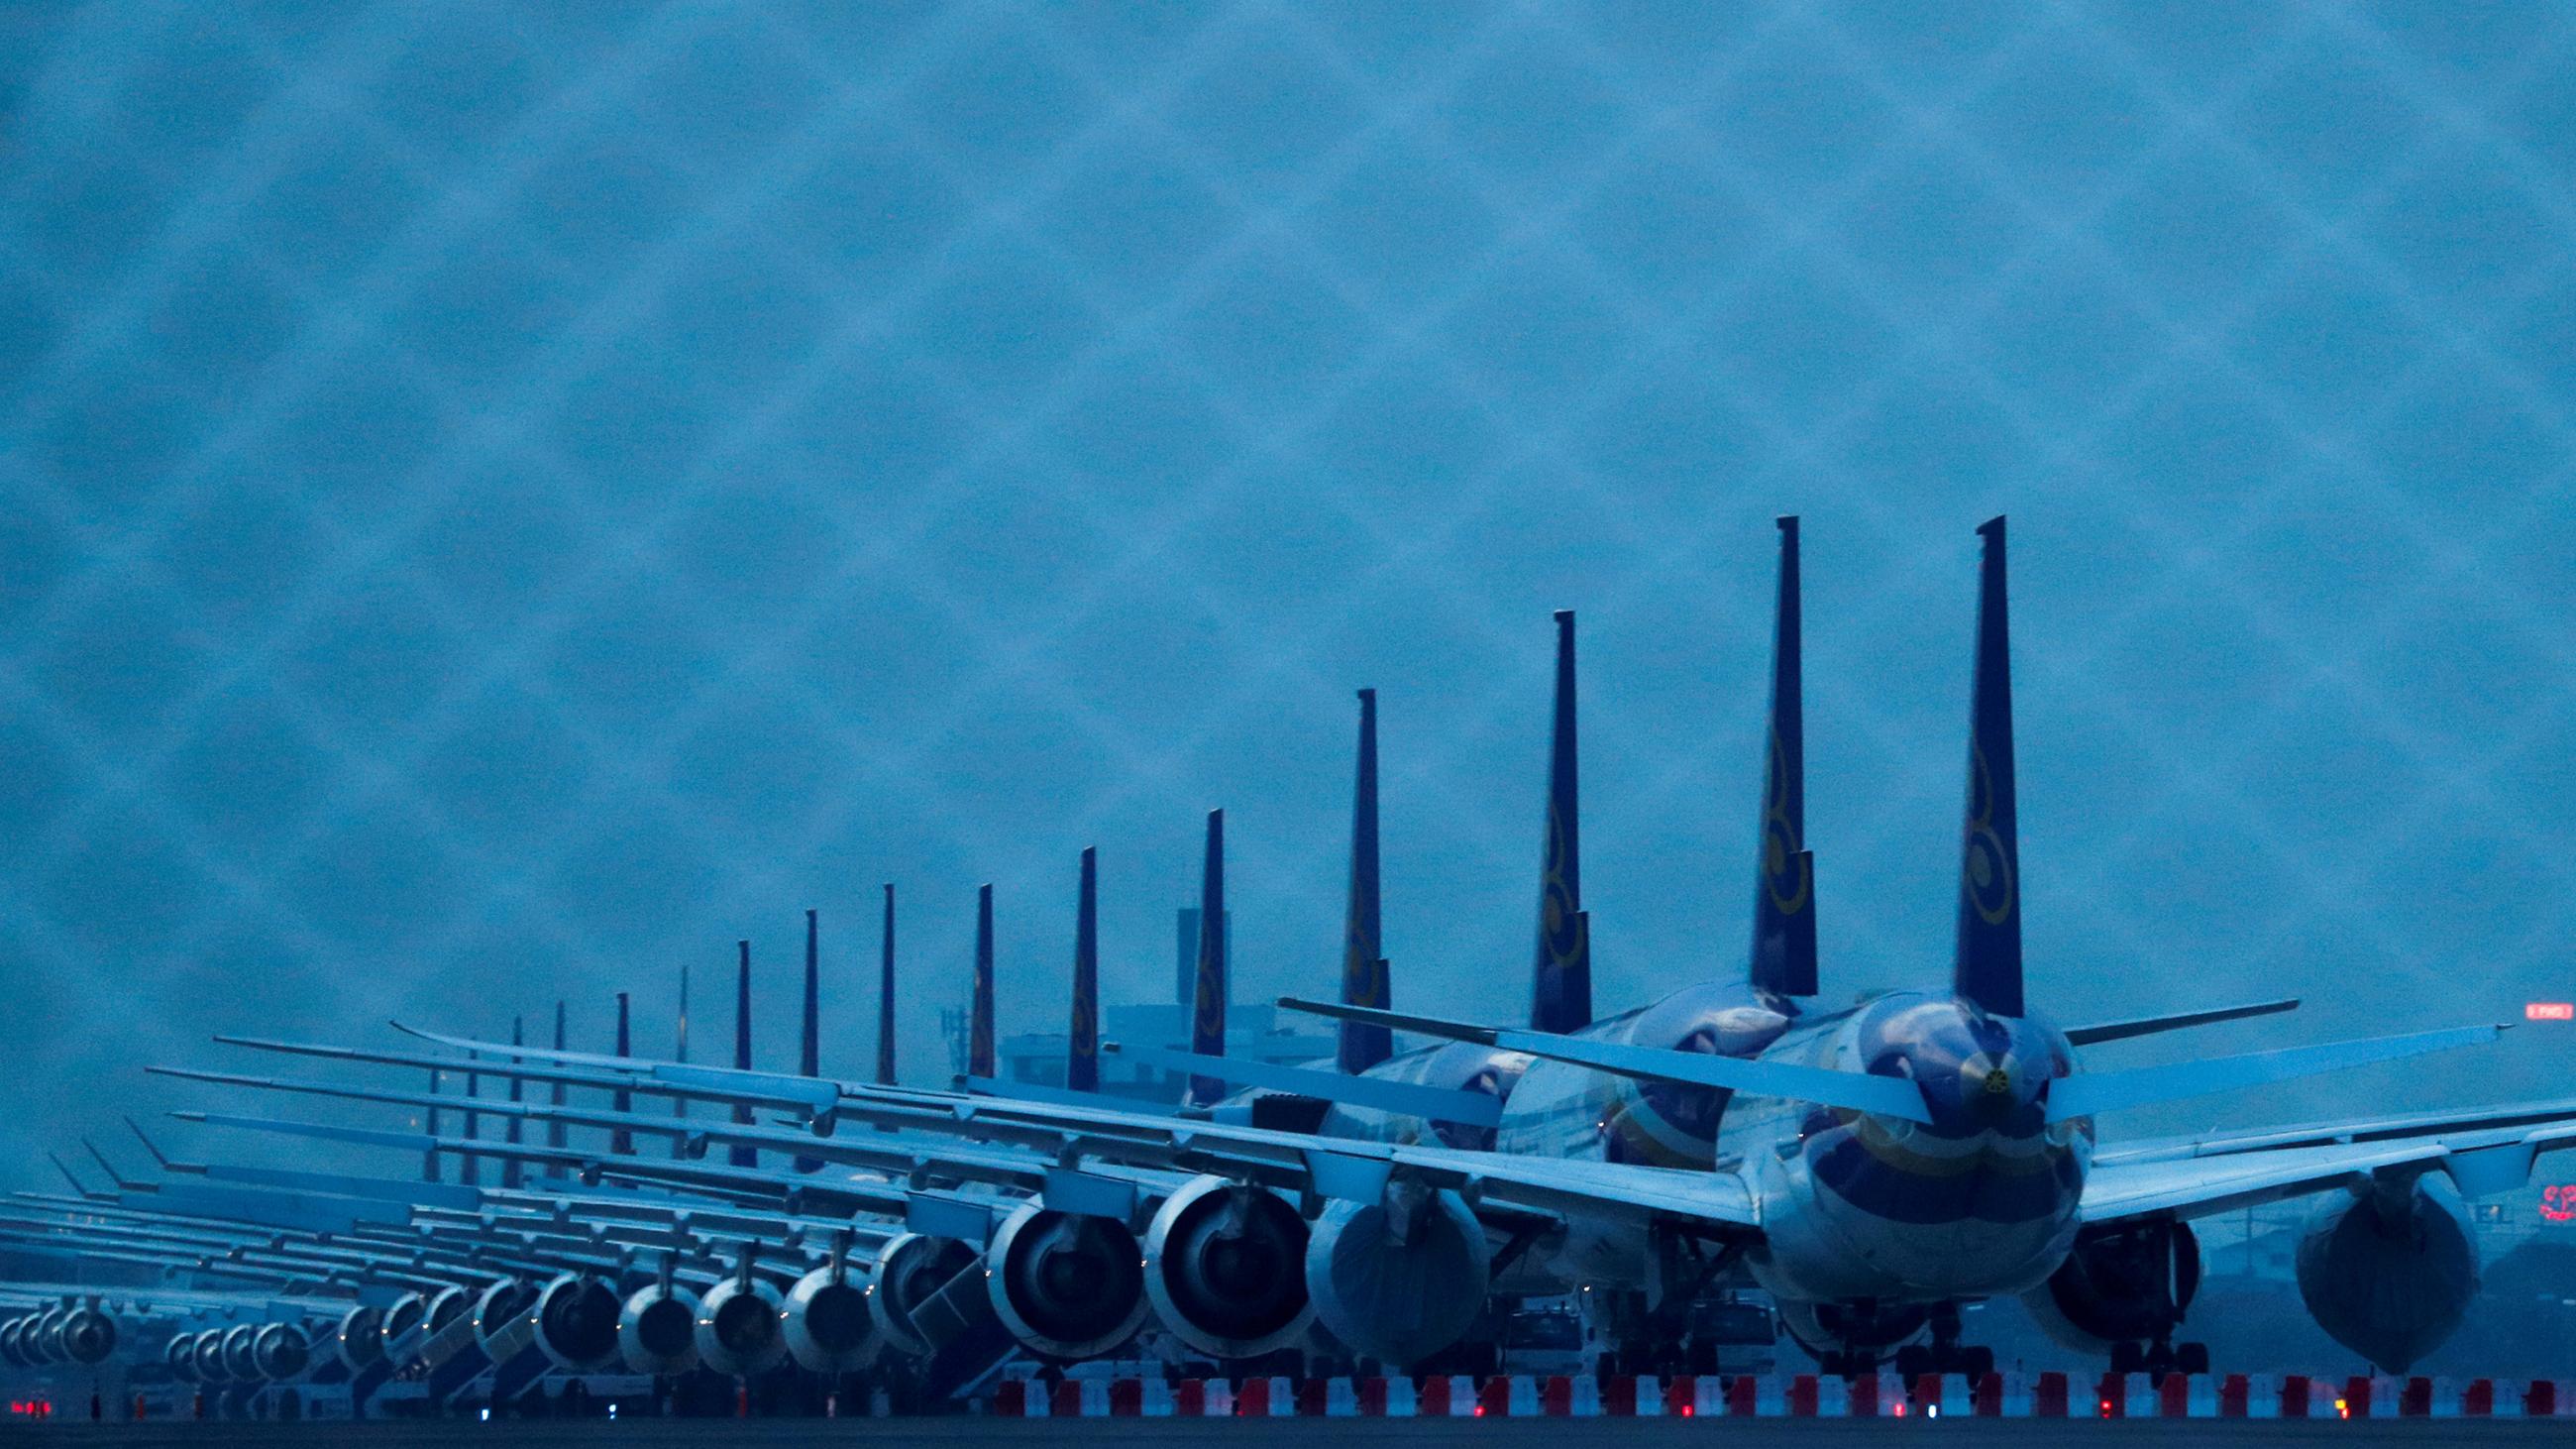 The photo shows a row of airplanes at dusk in a dark blue light. 